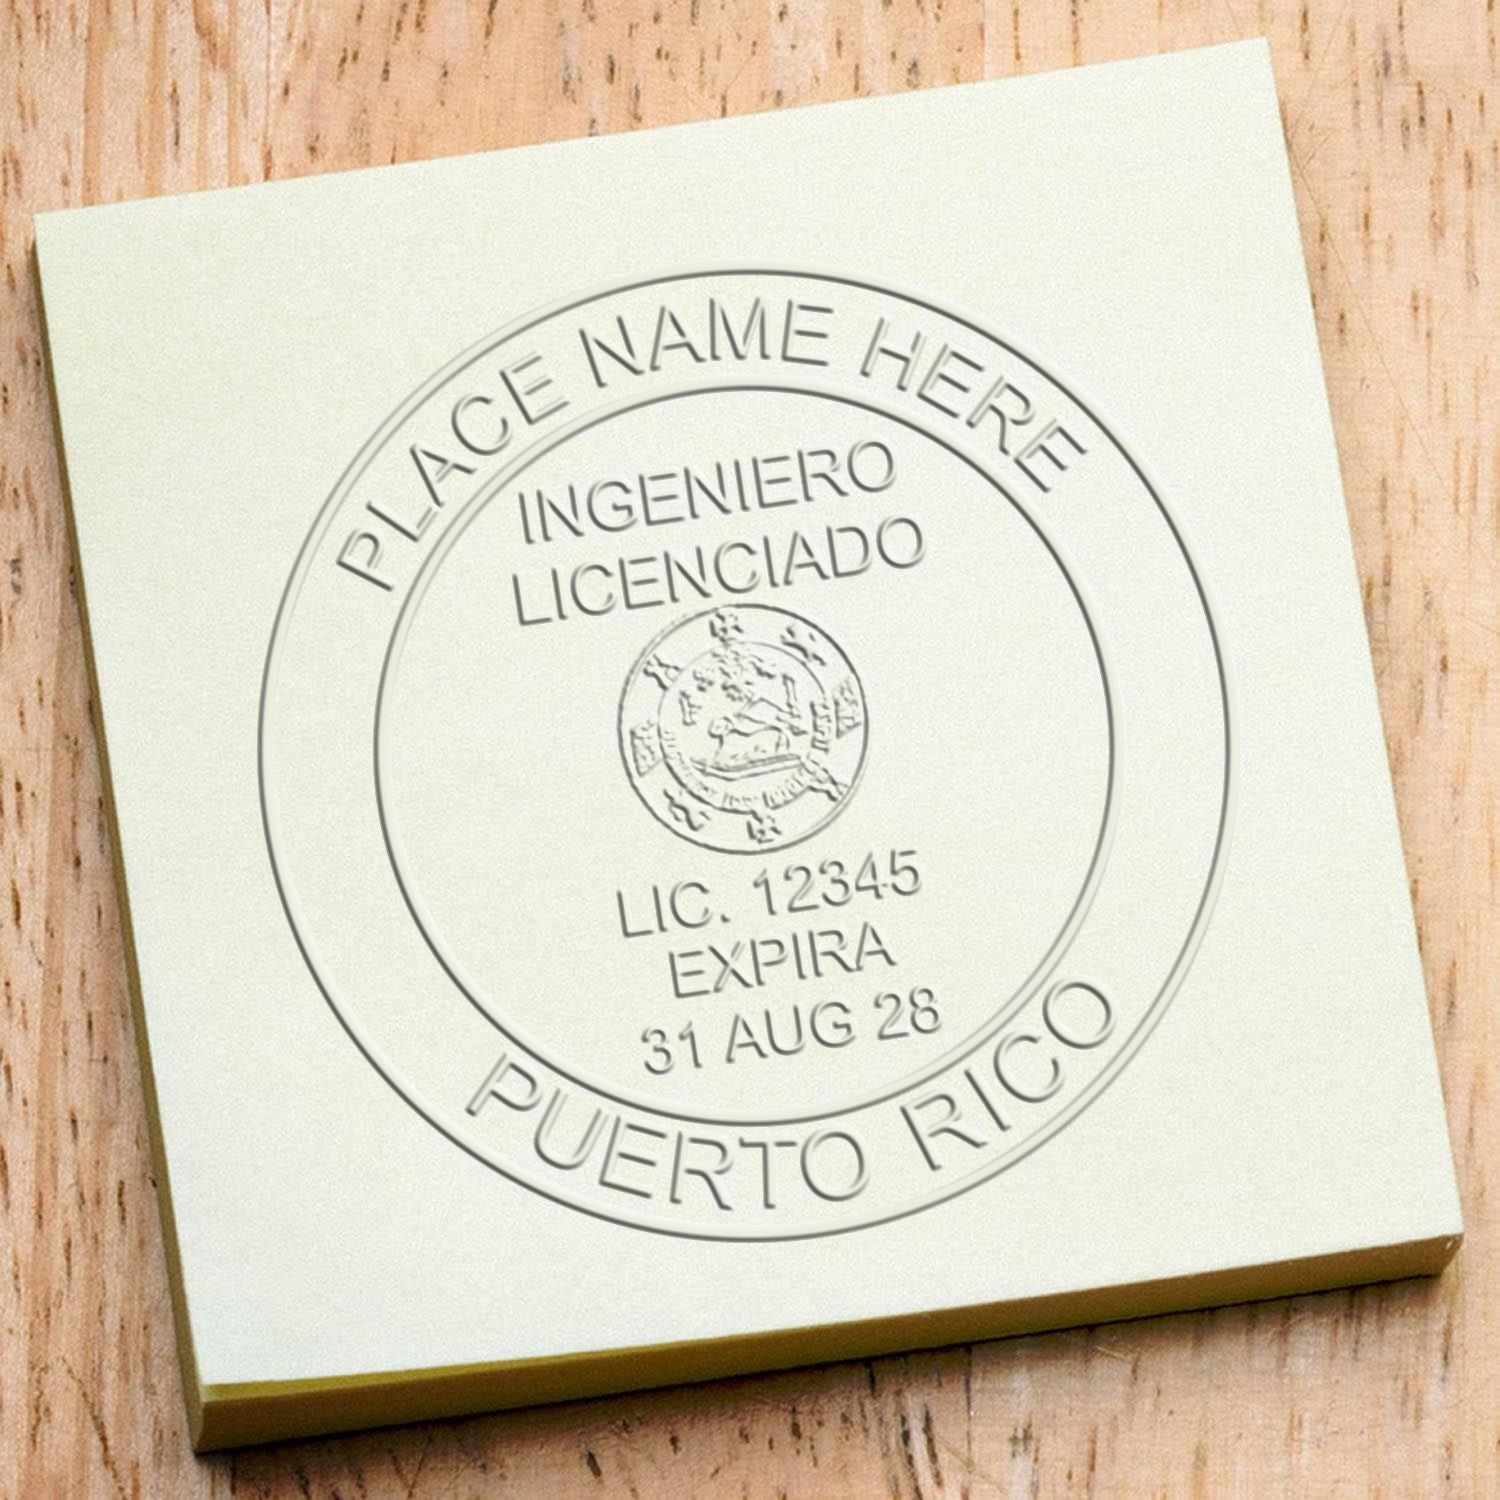 A photograph of the Soft Puerto Rico Professional Engineer Seal stamp impression reveals a vivid, professional image of the on paper.